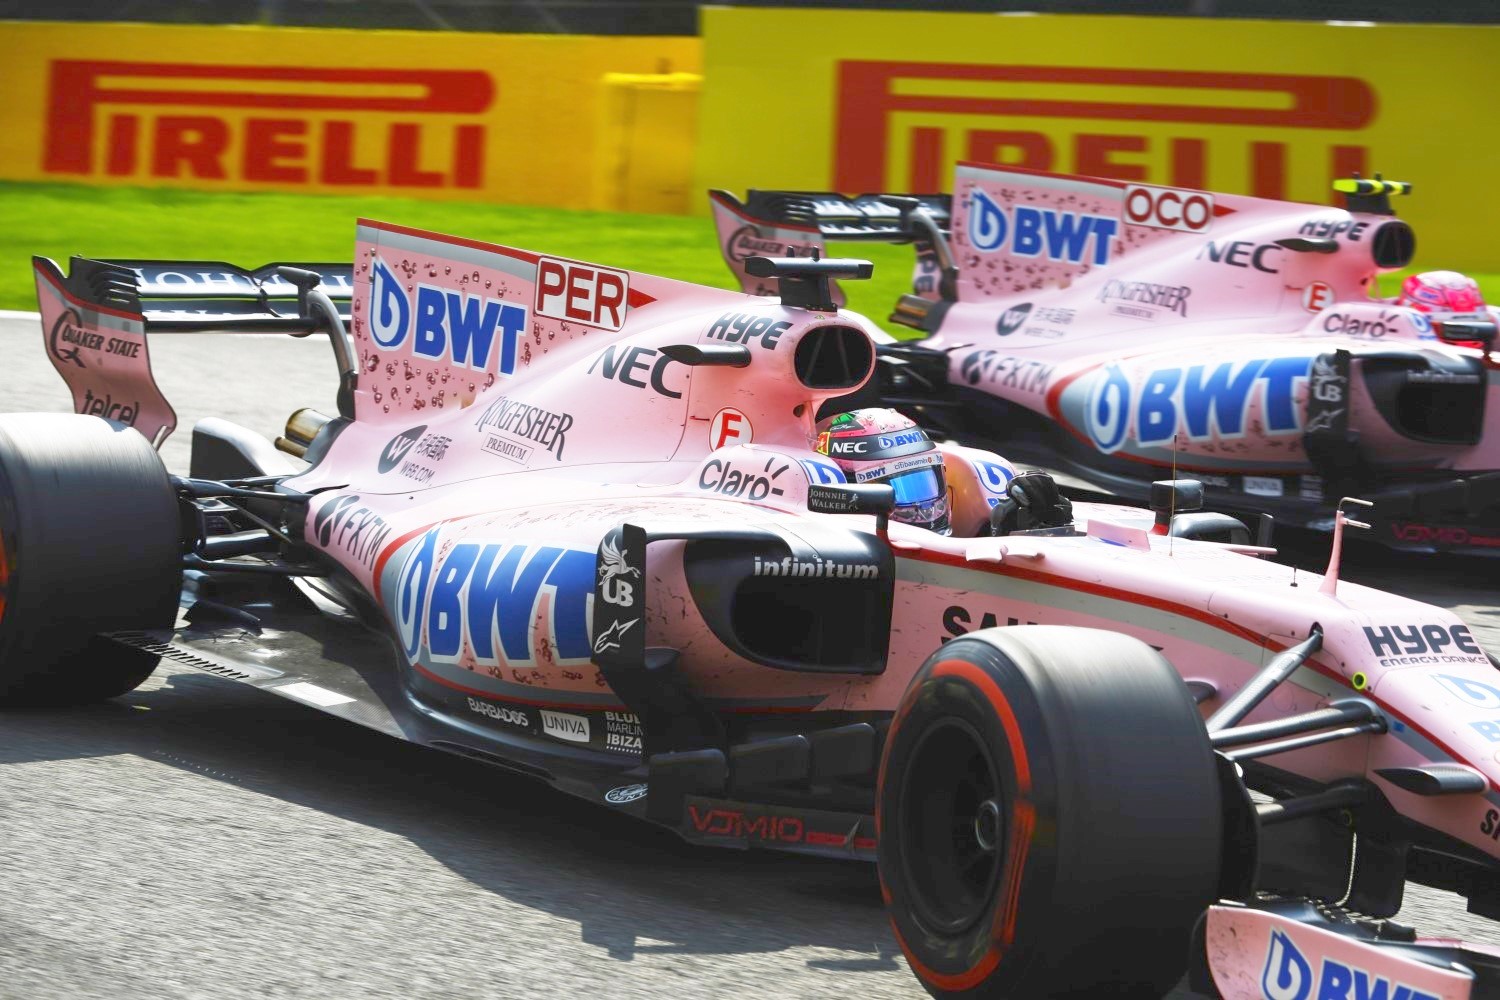 Force India drivers Ocon and Perez touched not once, but twice